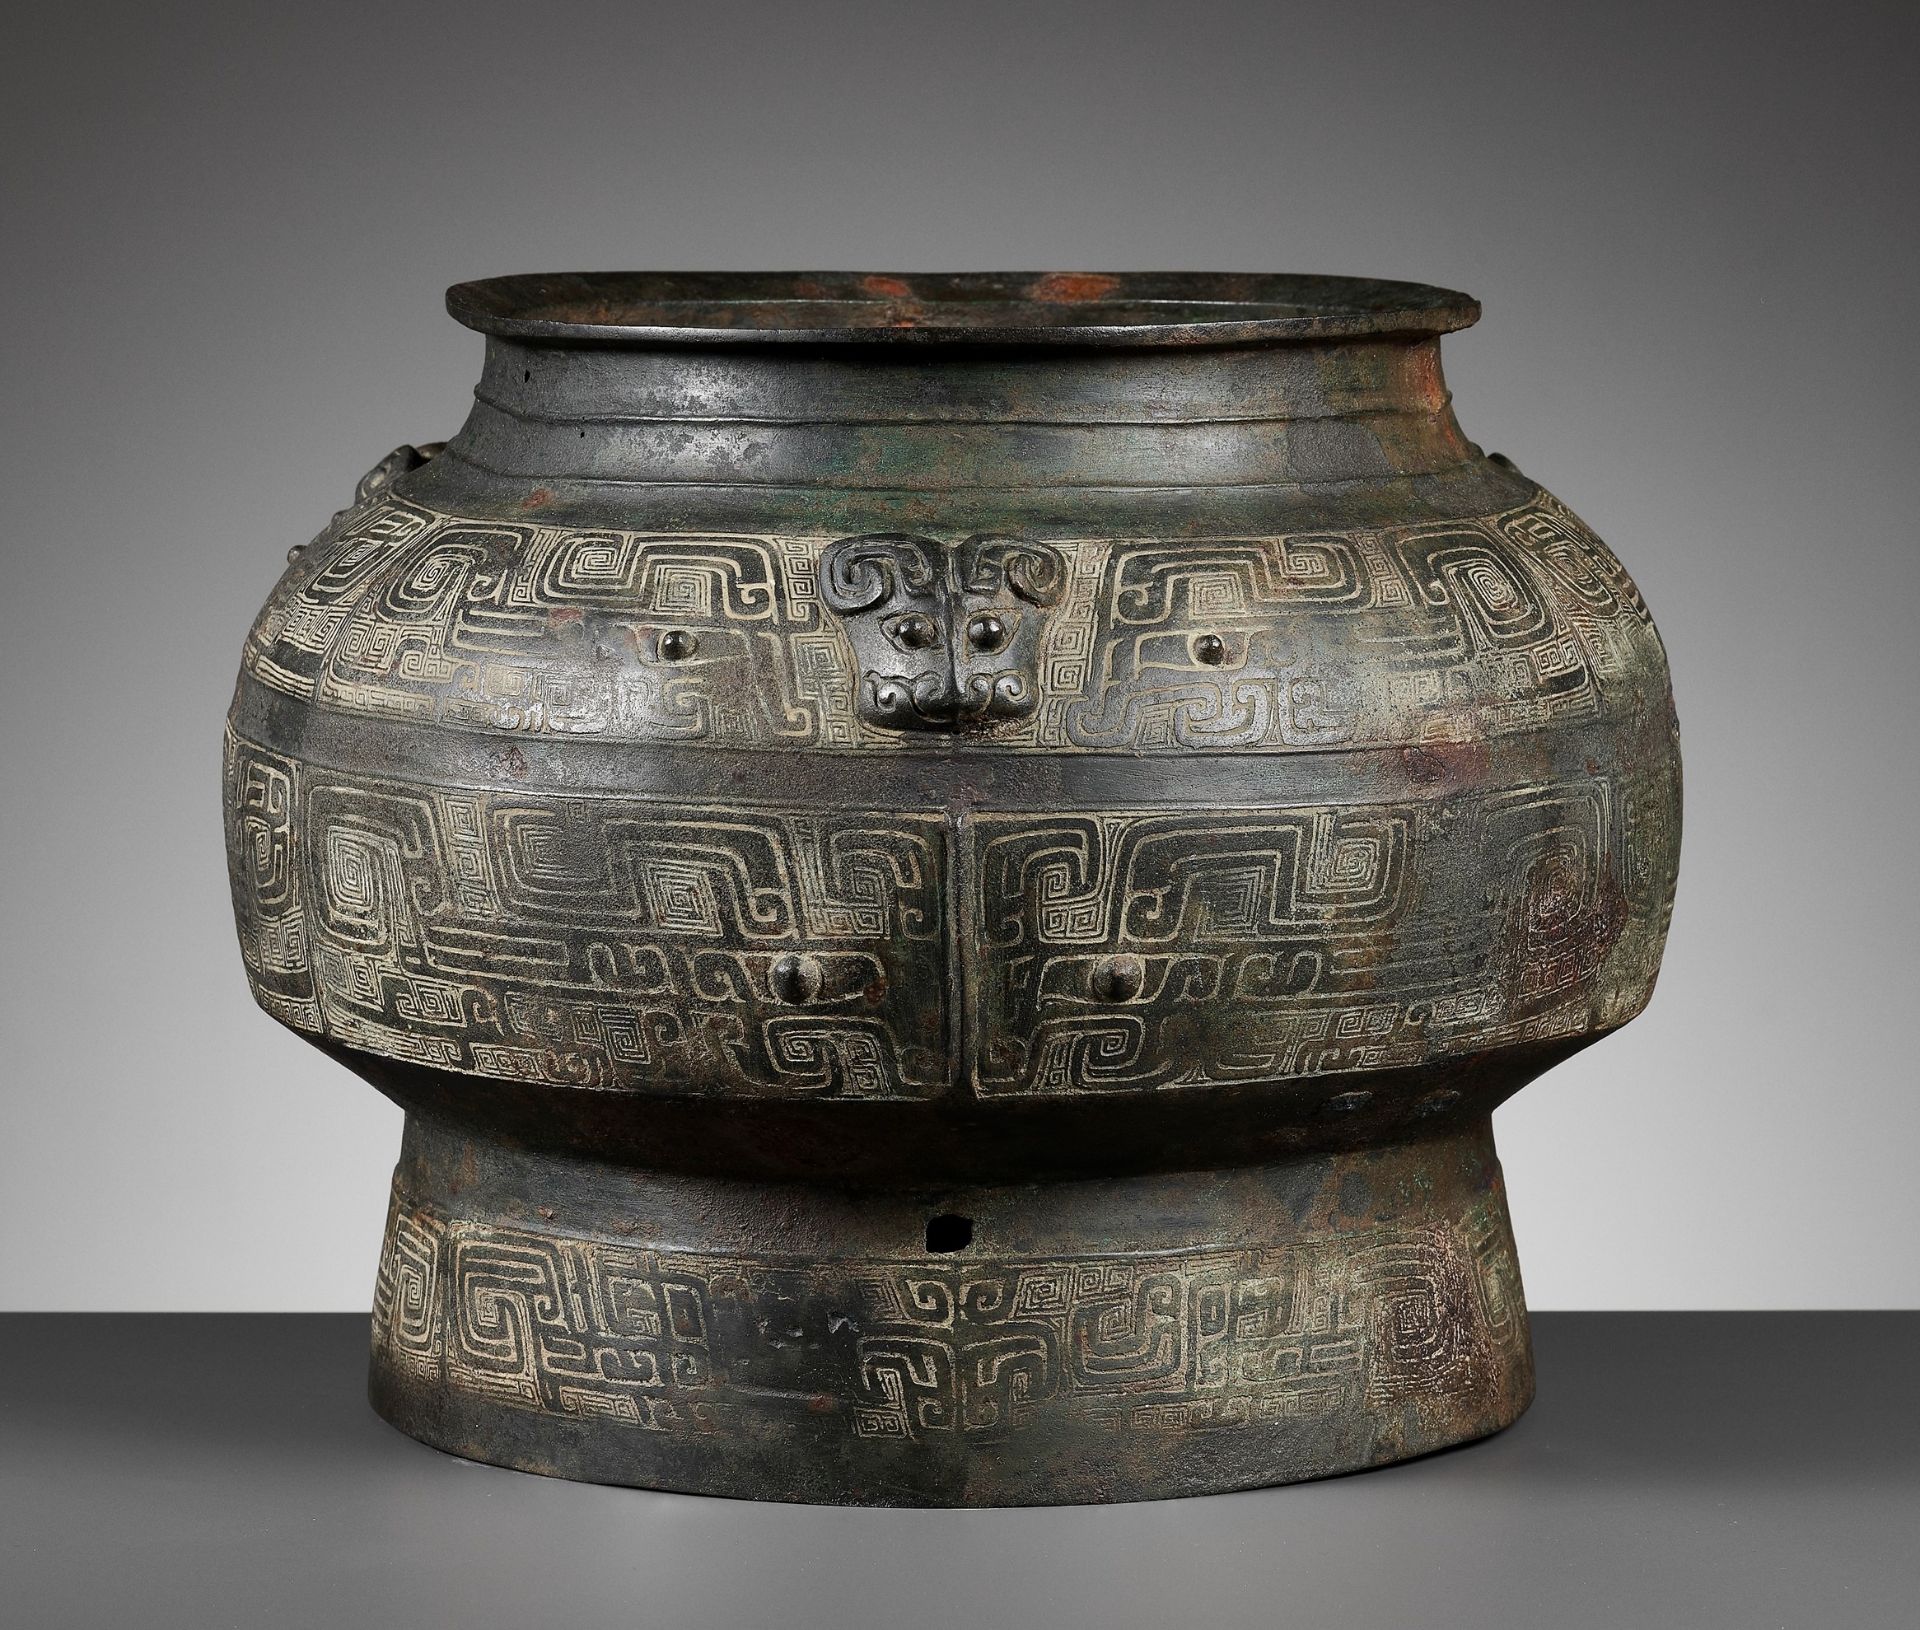 A LARGE AND FINELY CAST RITUAL BRONZE WINE VESSEL, POU, SHANG DYNASTY